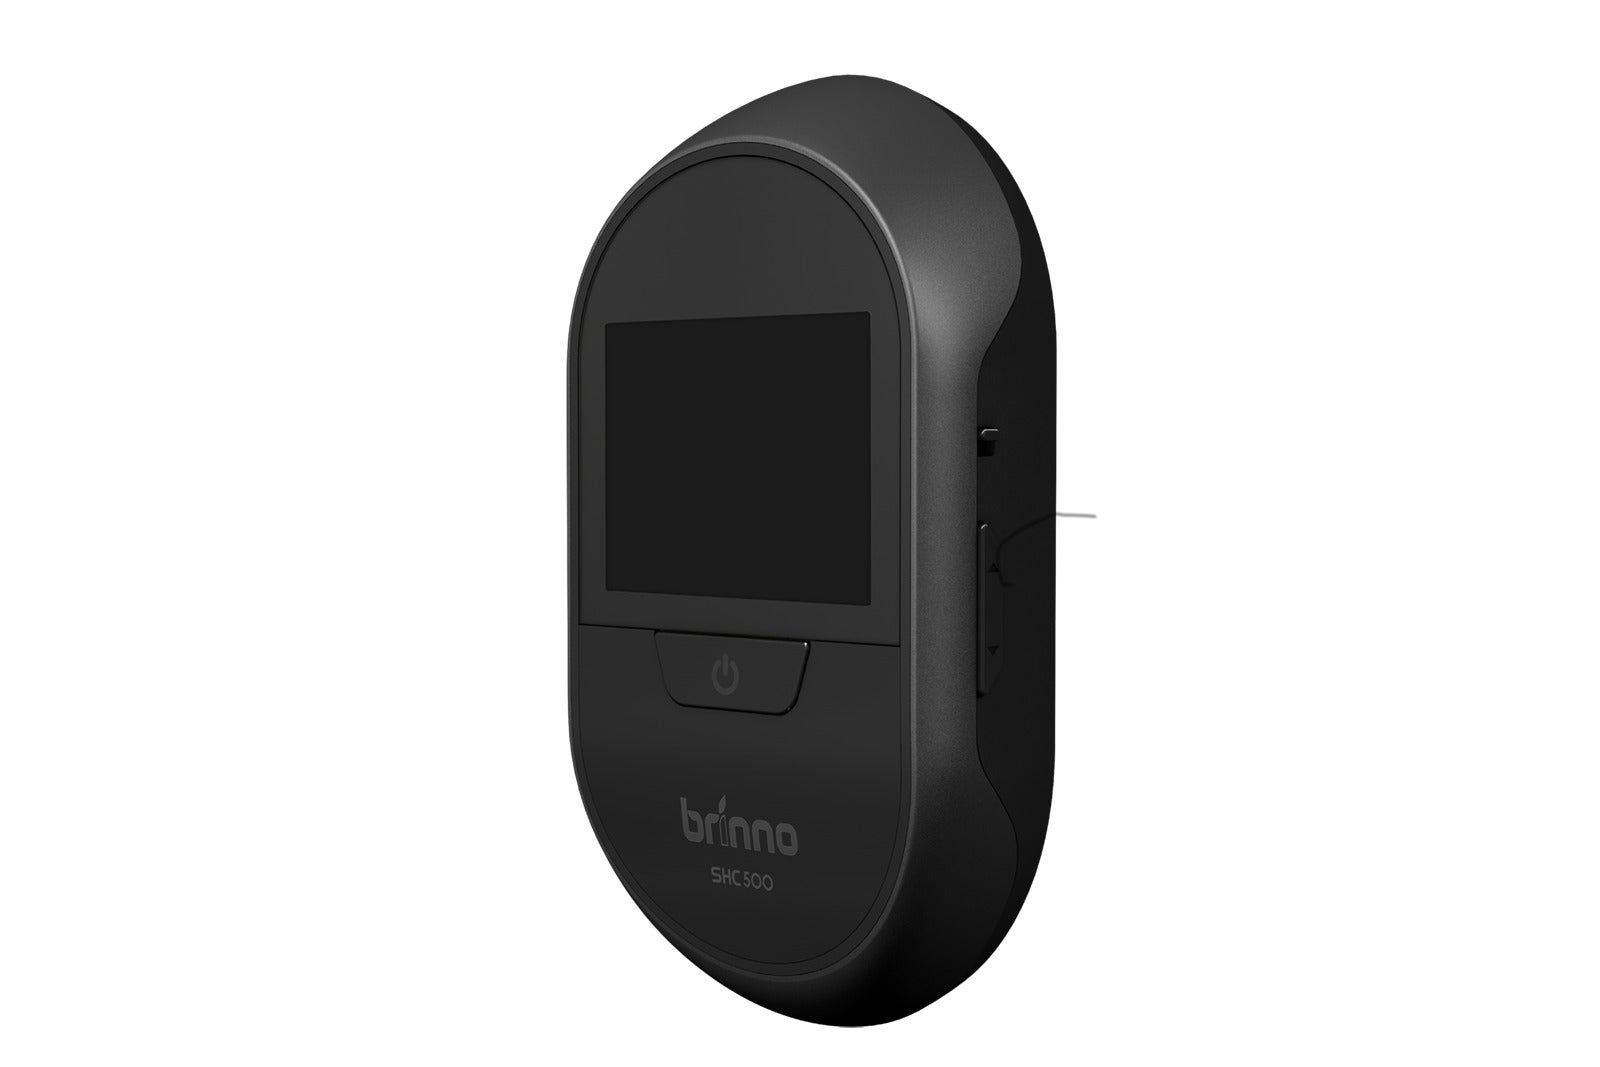 Brinno Shc500 Peephole Camera Review Peep Your Porch With This Hidden Camera Techhive